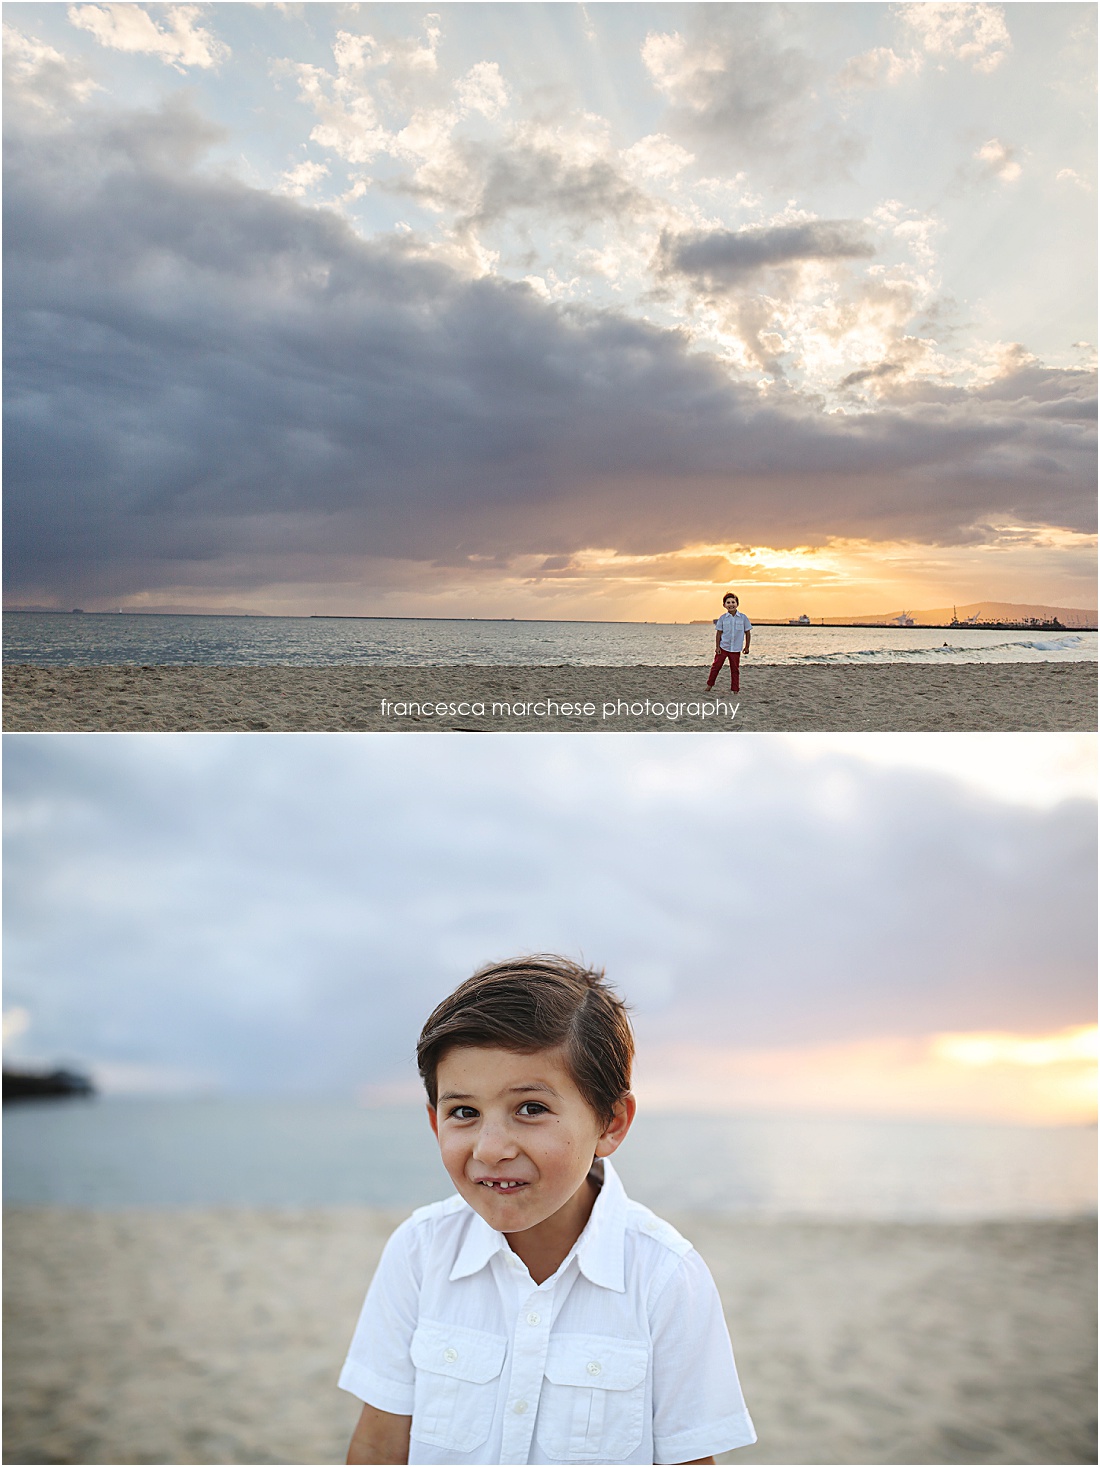 Francesca Marchese Photography - family photography session at the beach